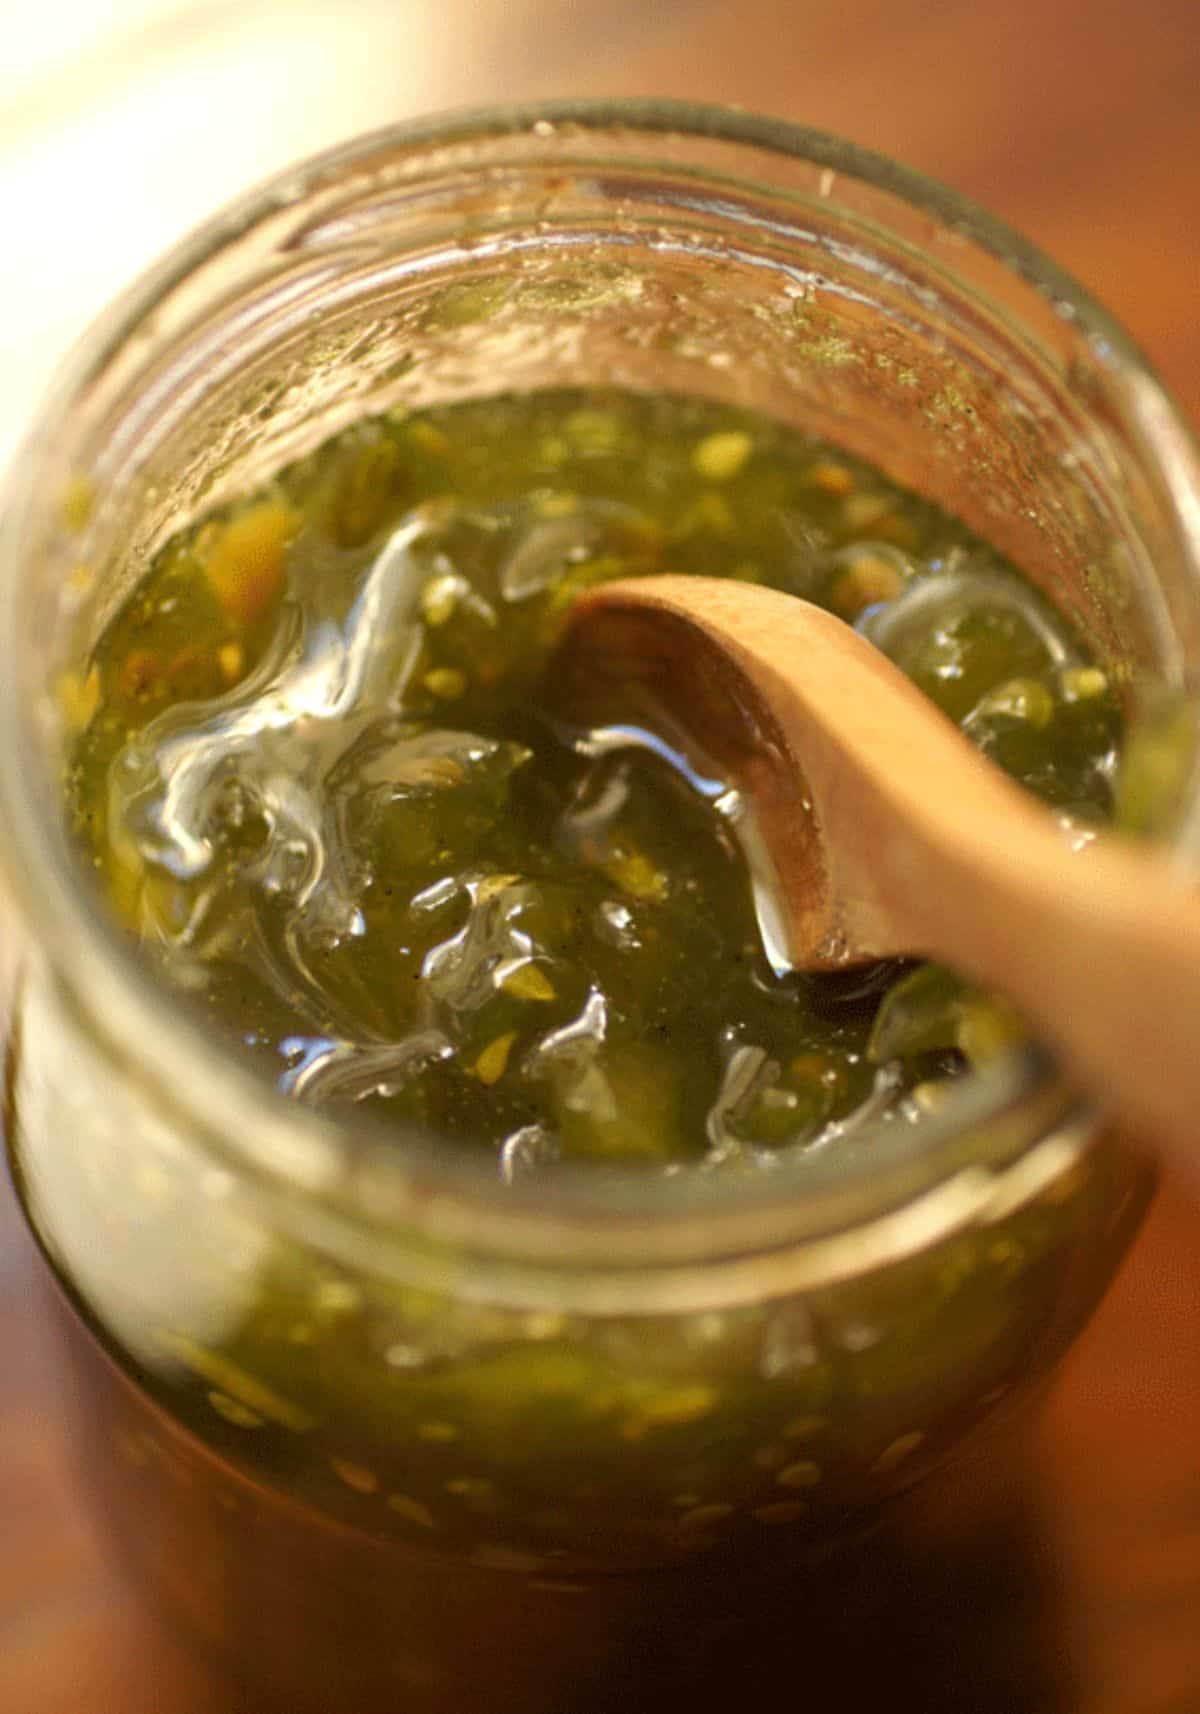 Green tomato jam in a glass jar with a wooden spoon.